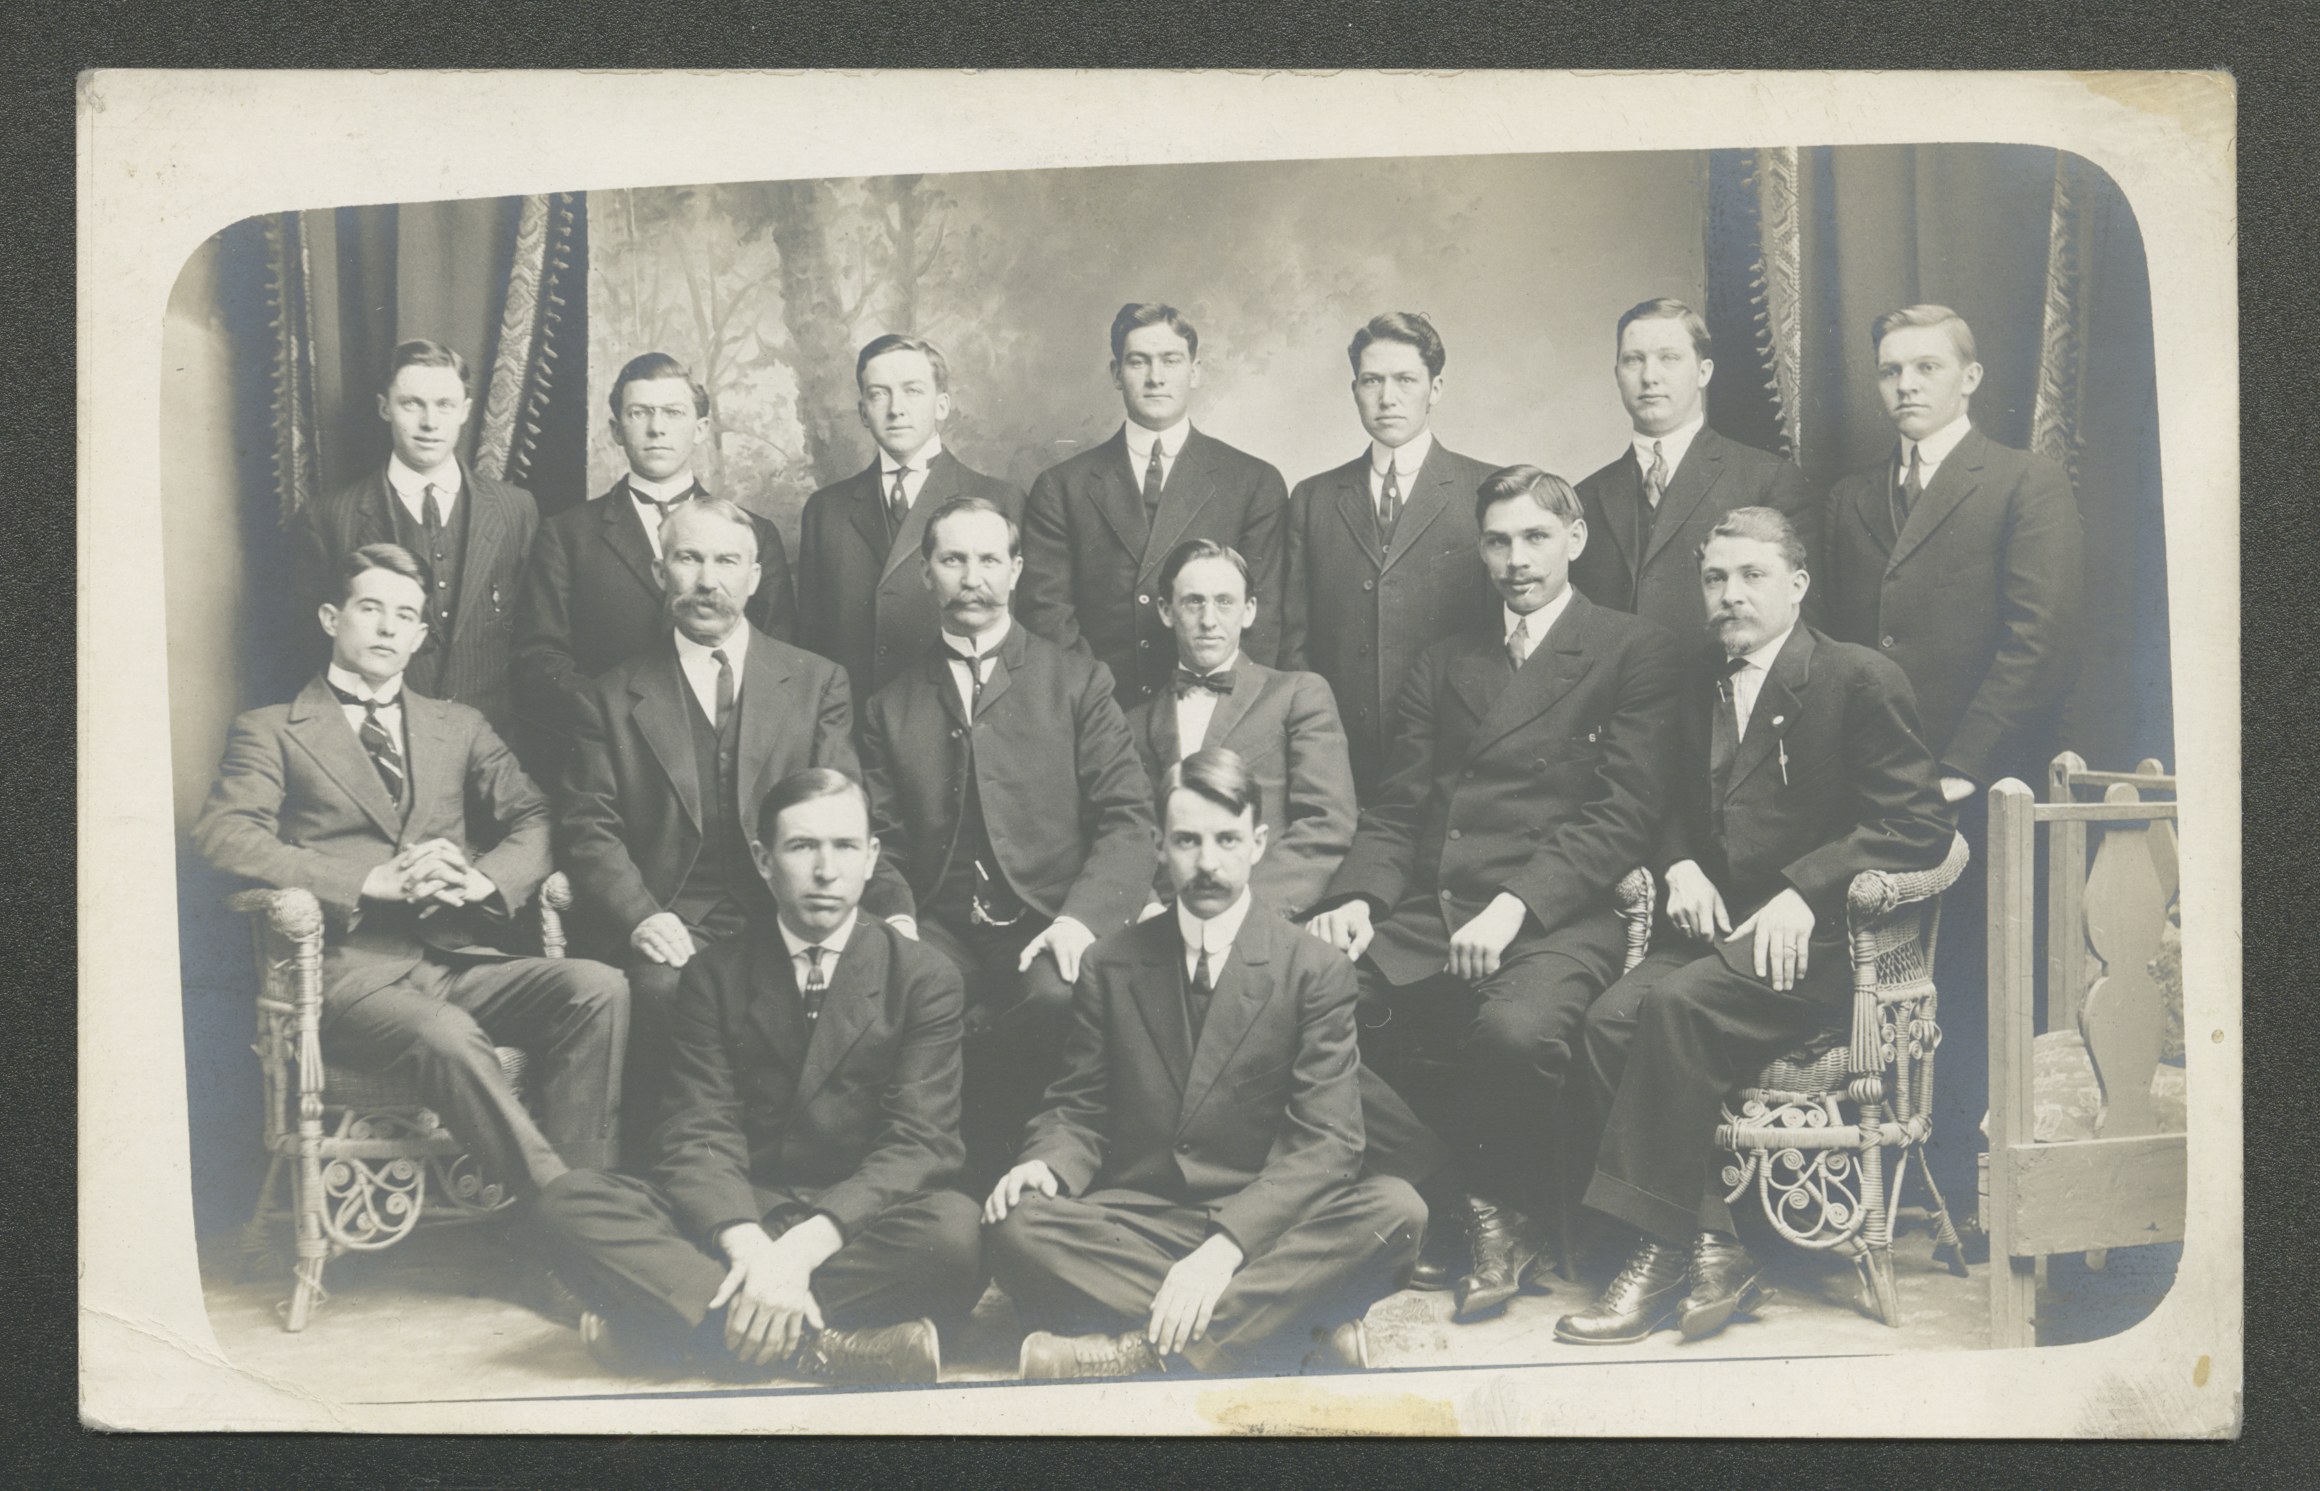 Mission Conference, August 1913